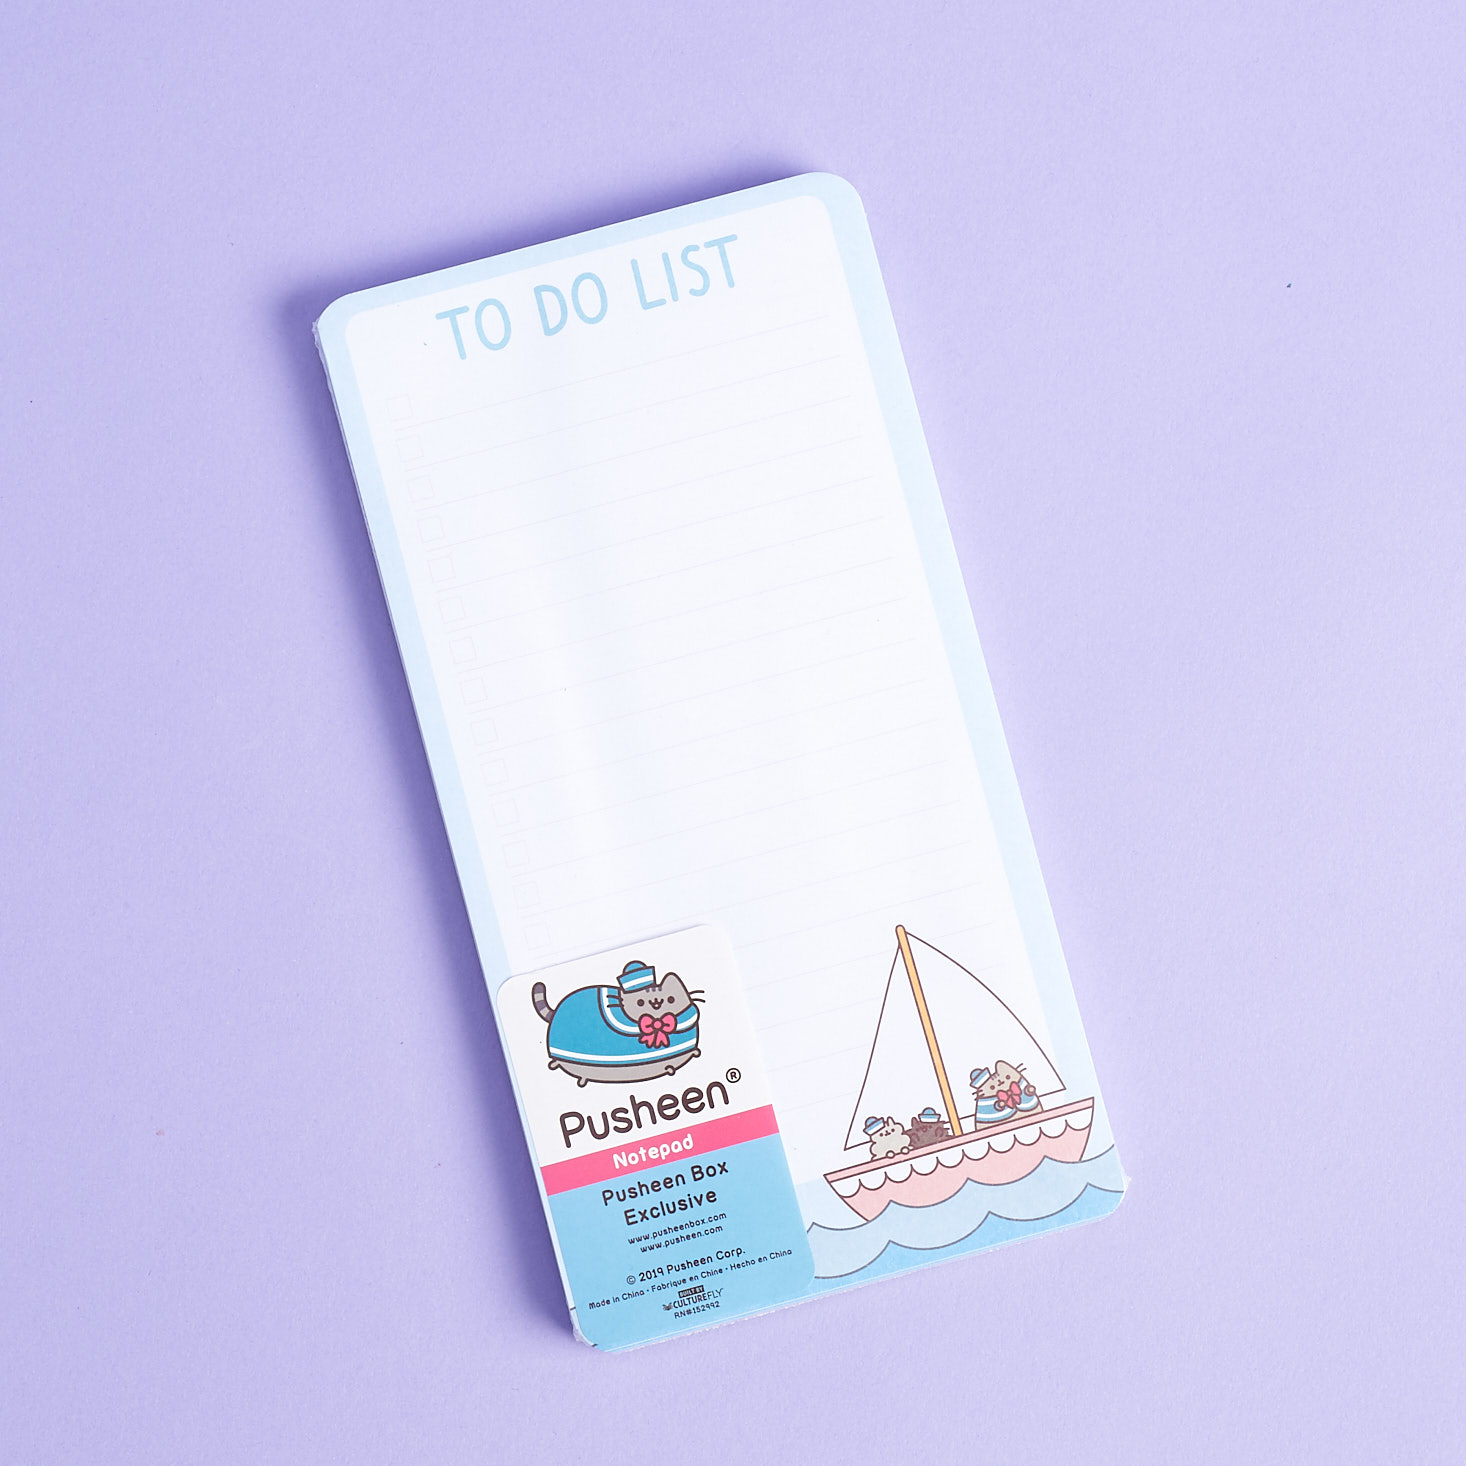 Pusheen magnetic to-do list